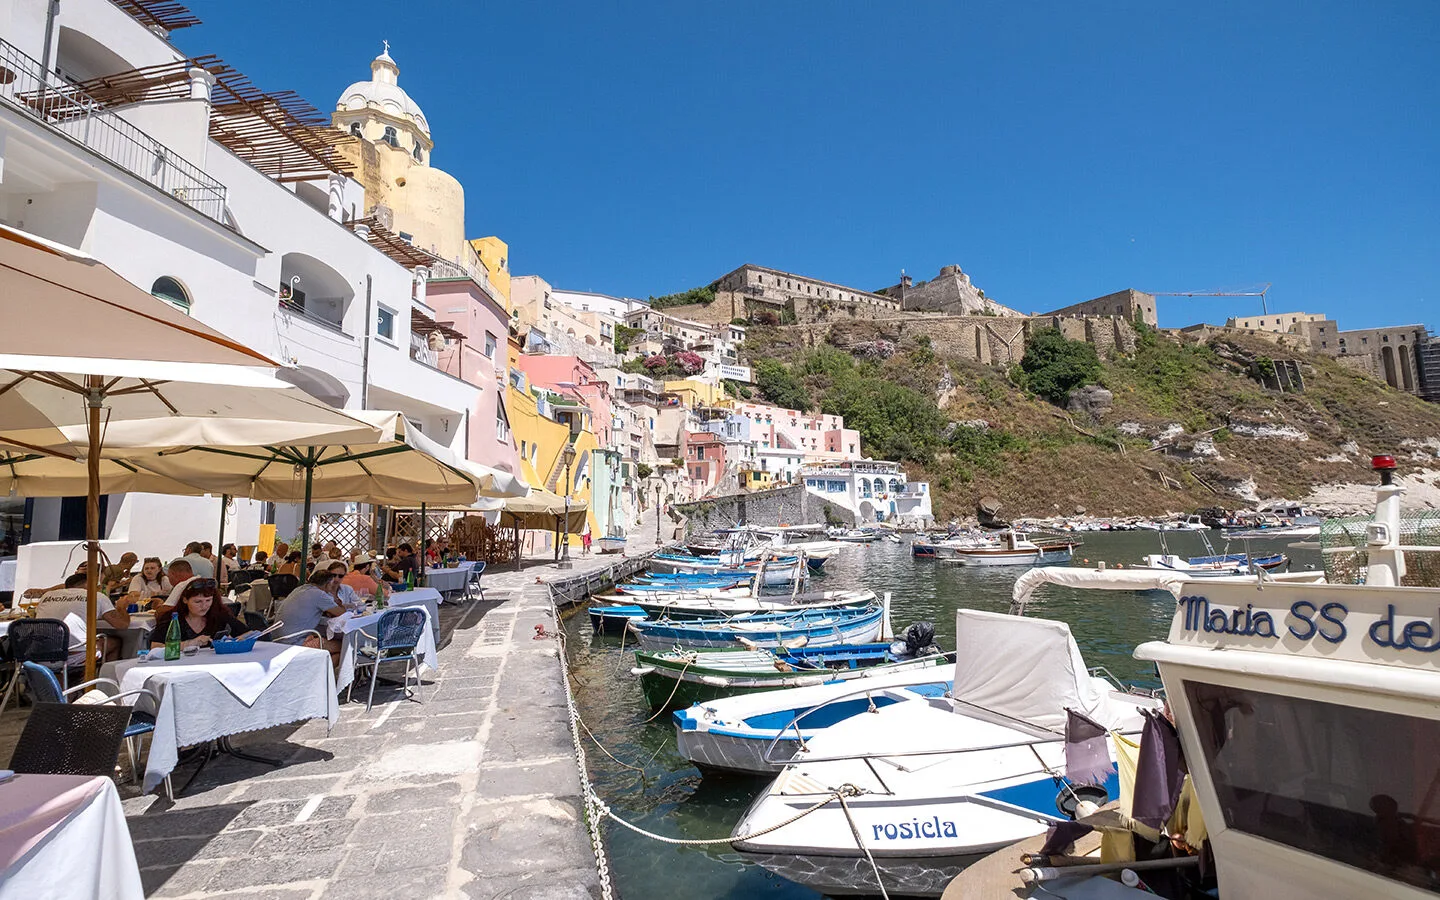 Waterfront restaurants in picturesque Marina Corricella, one of the best things to do in Procida